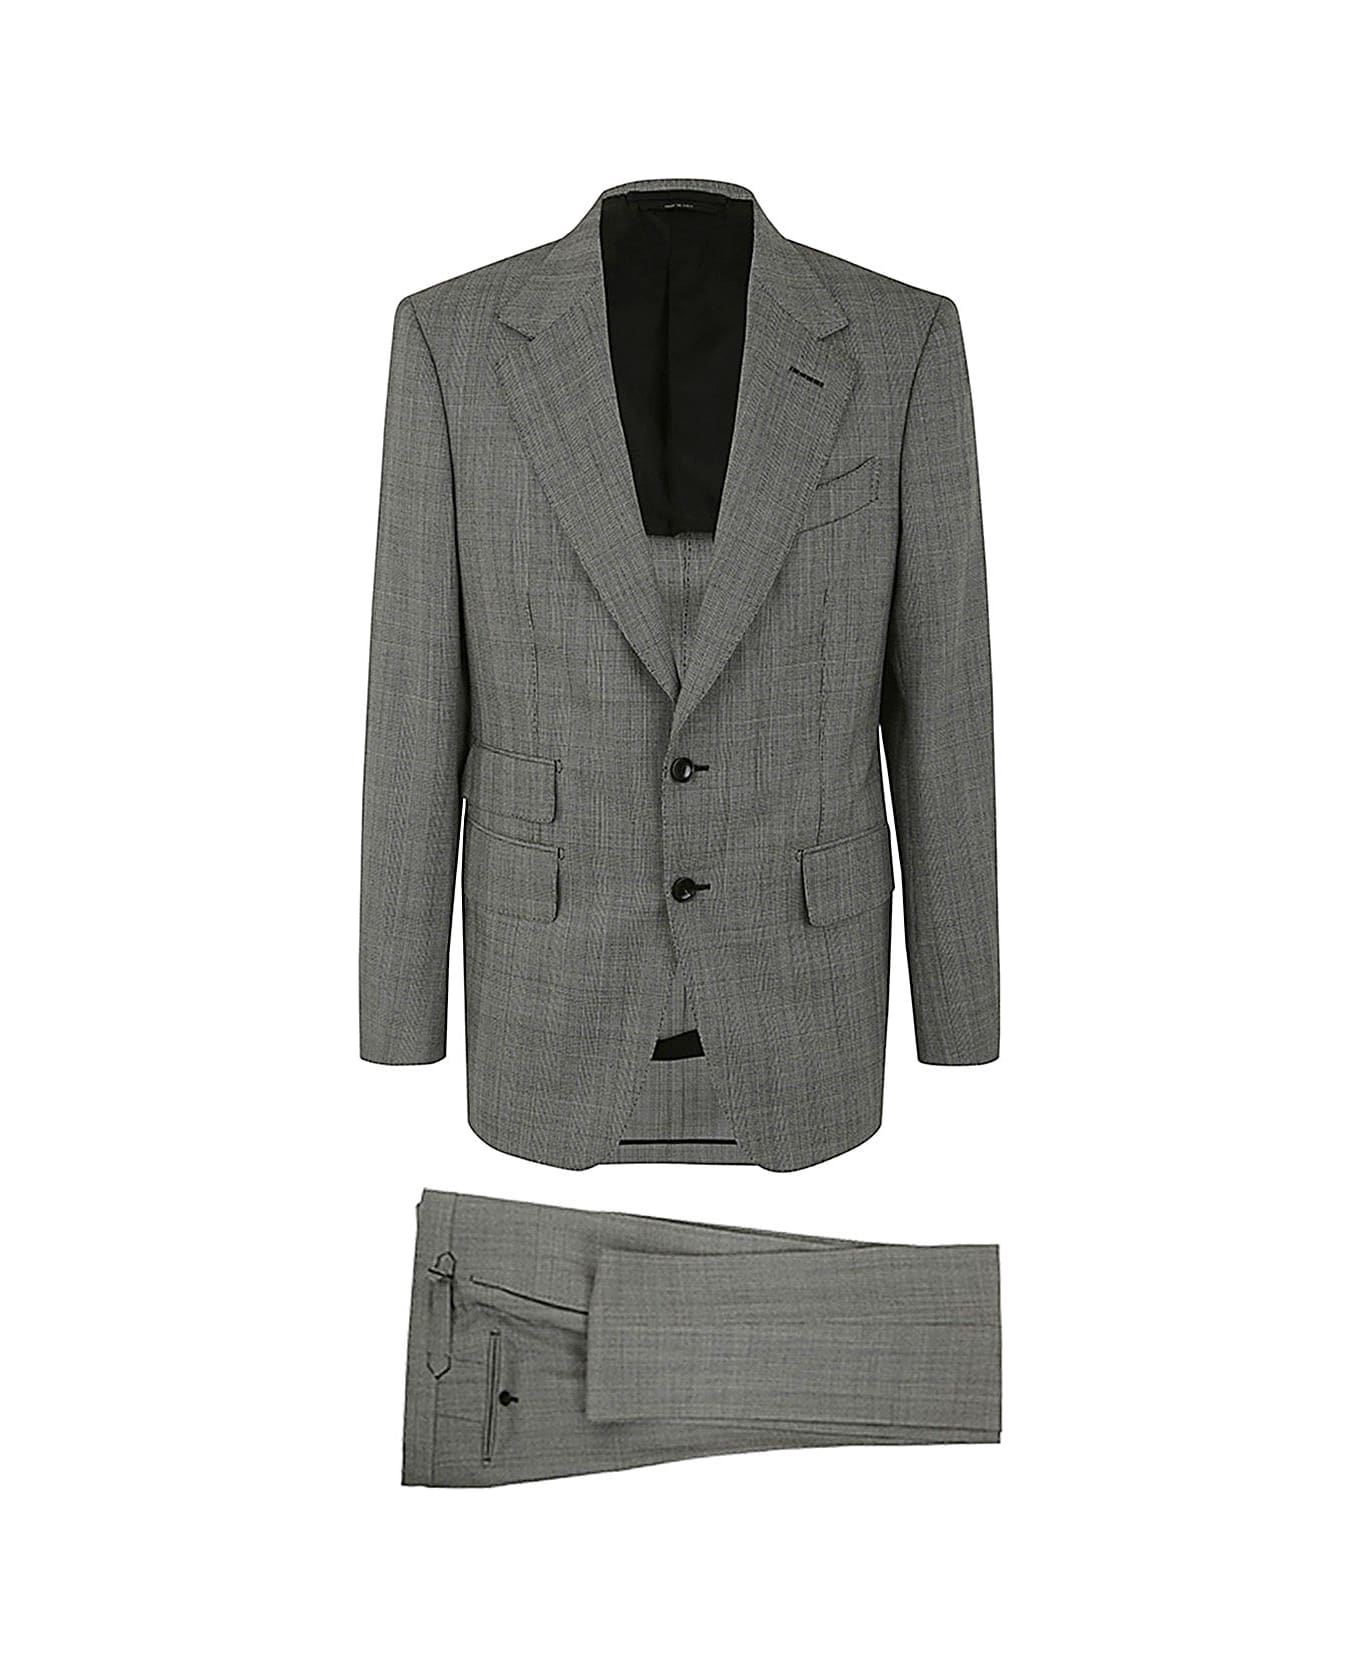 Tom Ford Single Breasted Suit - Zawbl Combo White Black